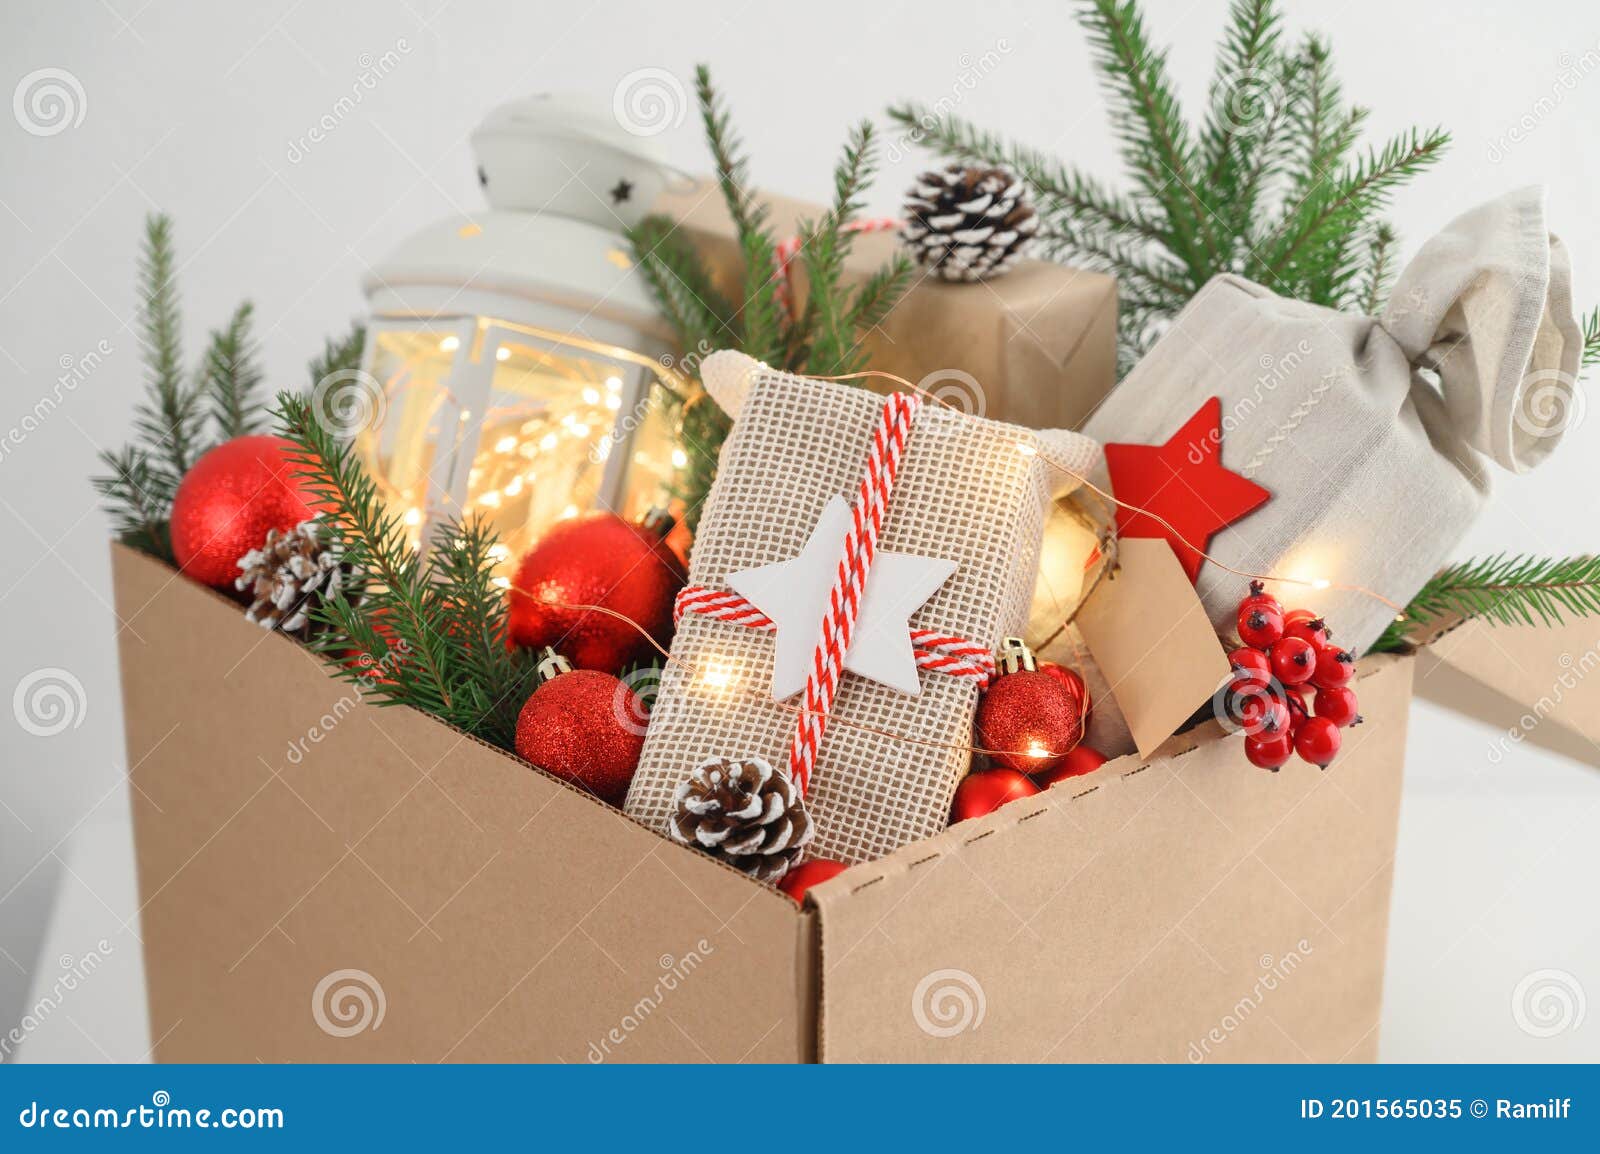 Christmas Gifts in Eco-friendly Reusable Packaging and Decorations ...